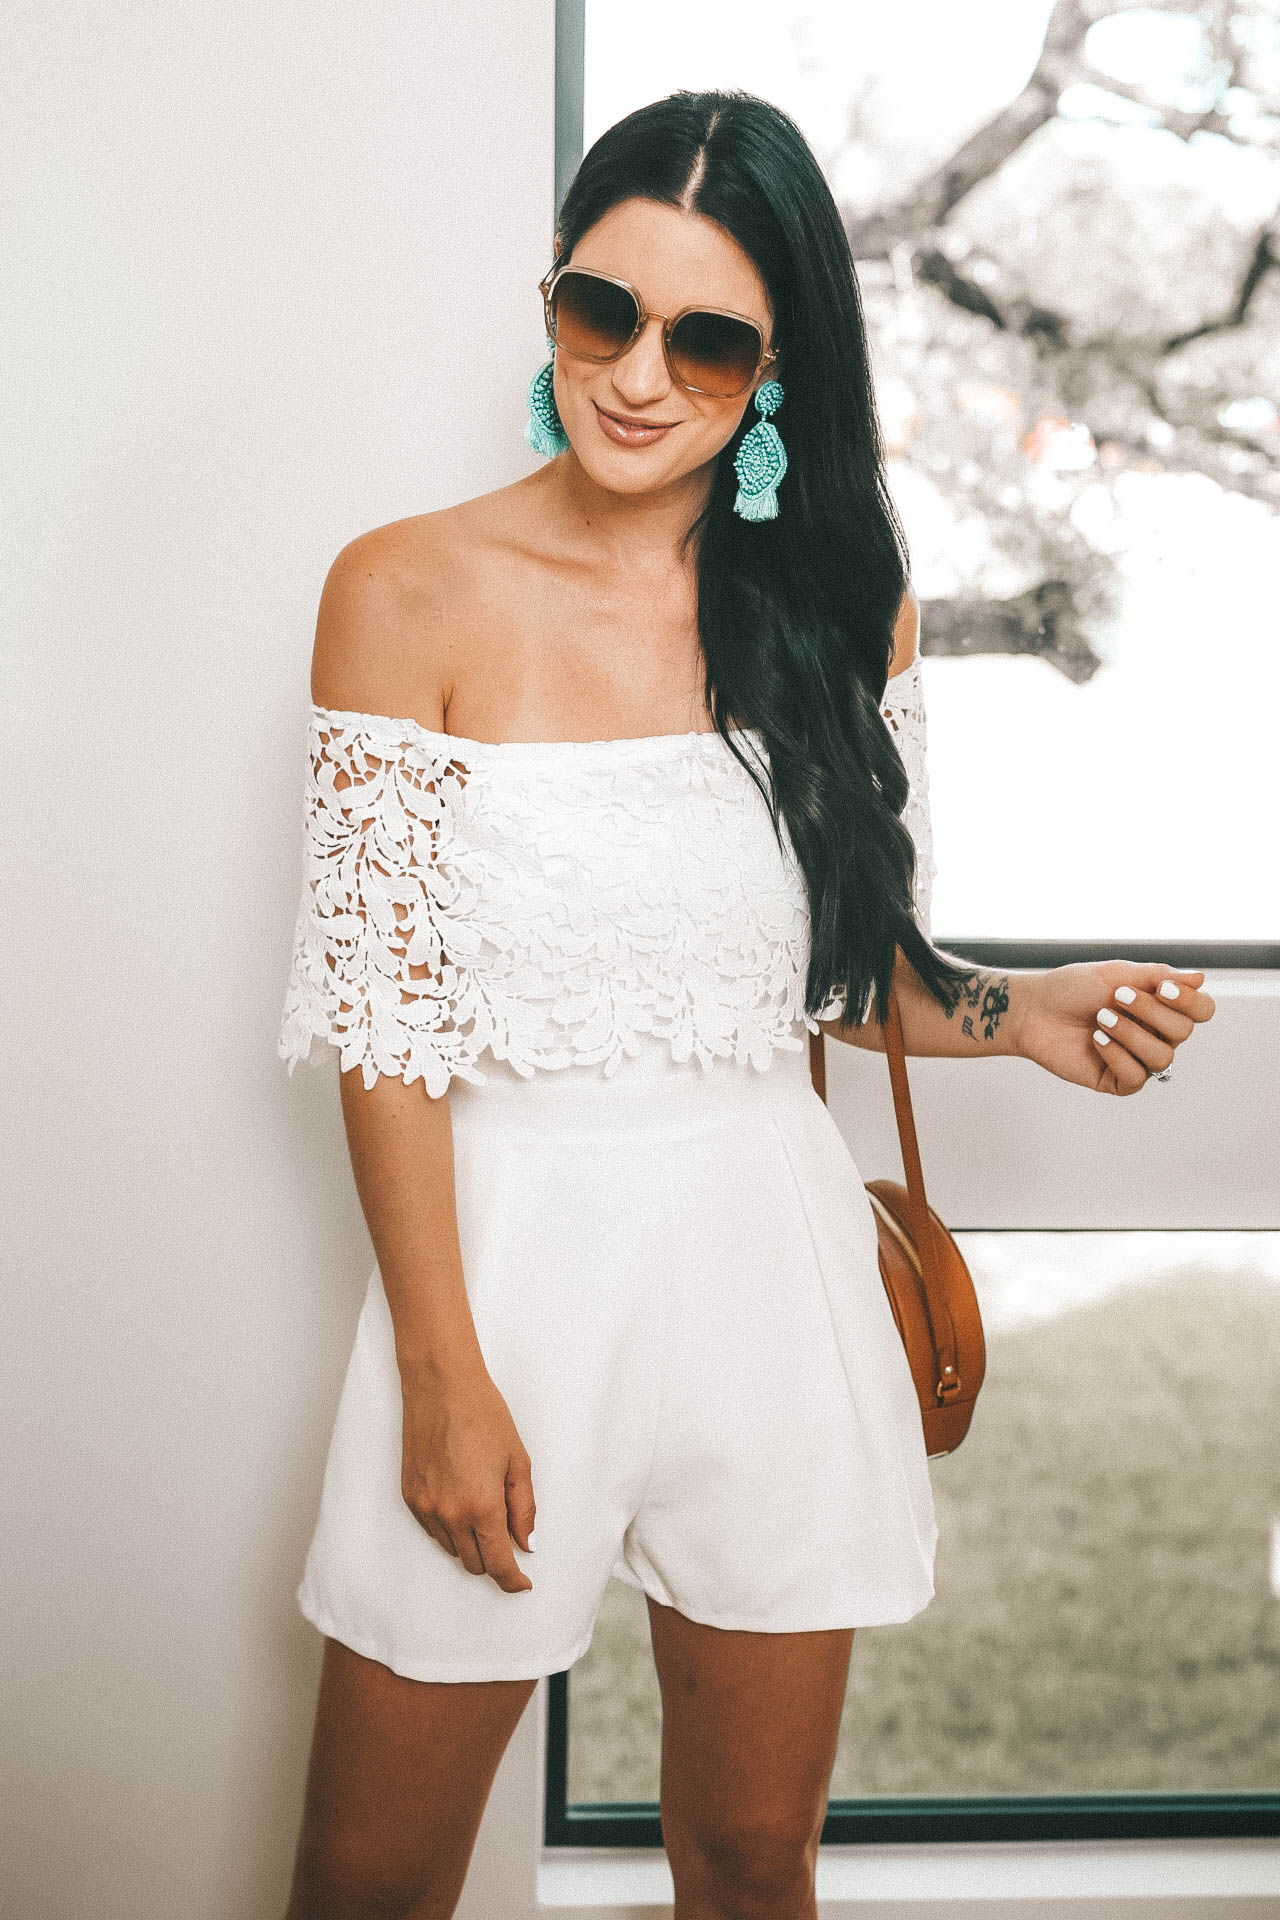 Are Summer Rompers still in style | Women's Fashion | how to style a romper | white romper | summer fashion || Dressed to Kill #style #fashion #outfits #summer #romper #whiteromper #summeroutfit #womensoutfit #dtkaustin